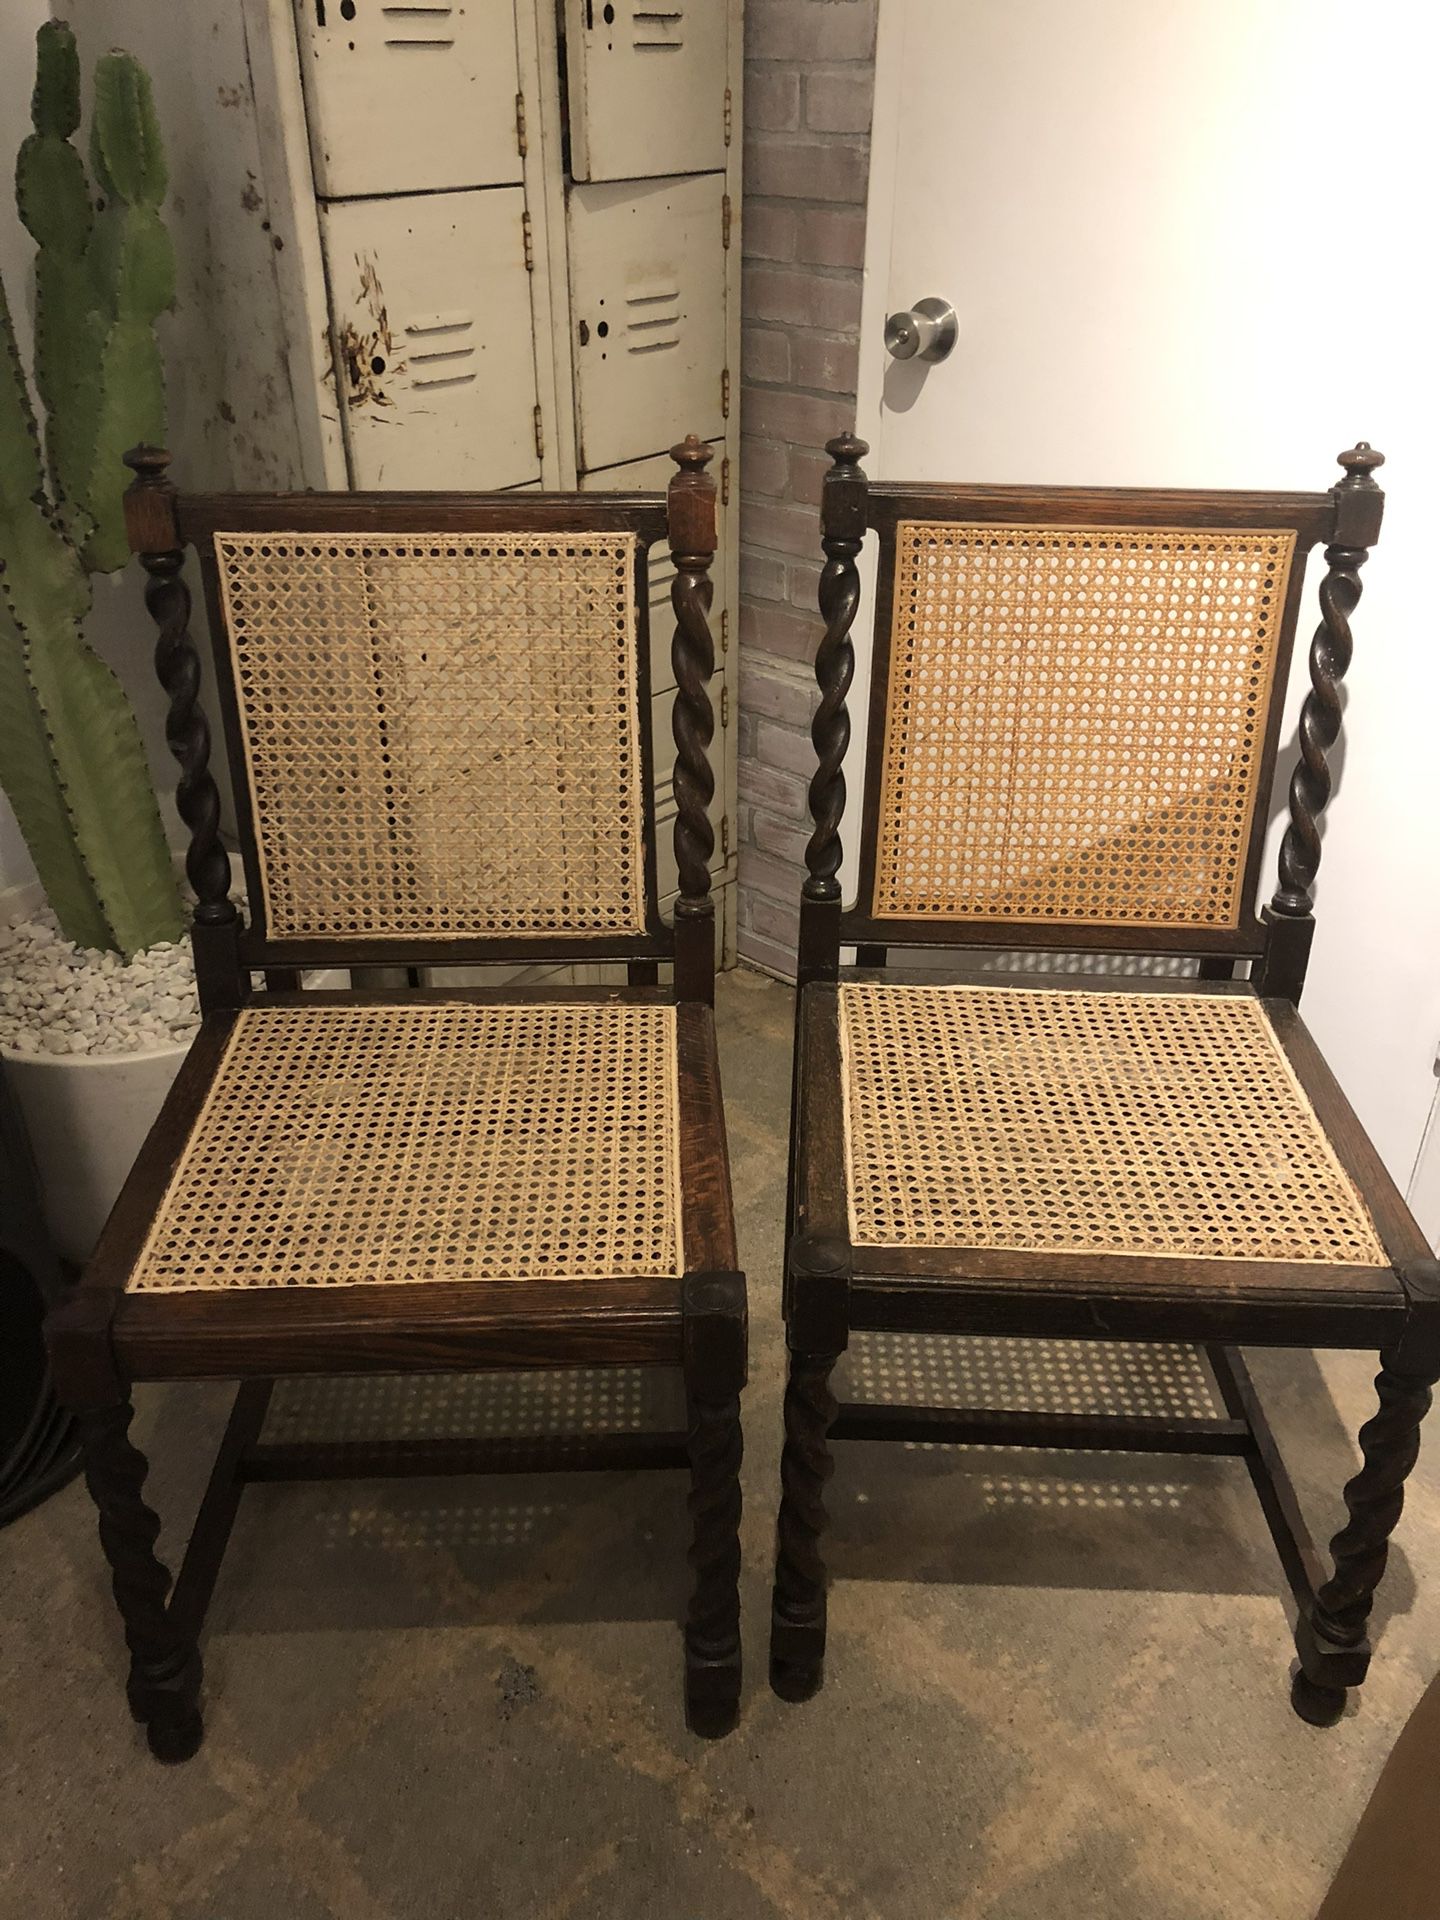 Set Of 4 Wooden Cane Chairs